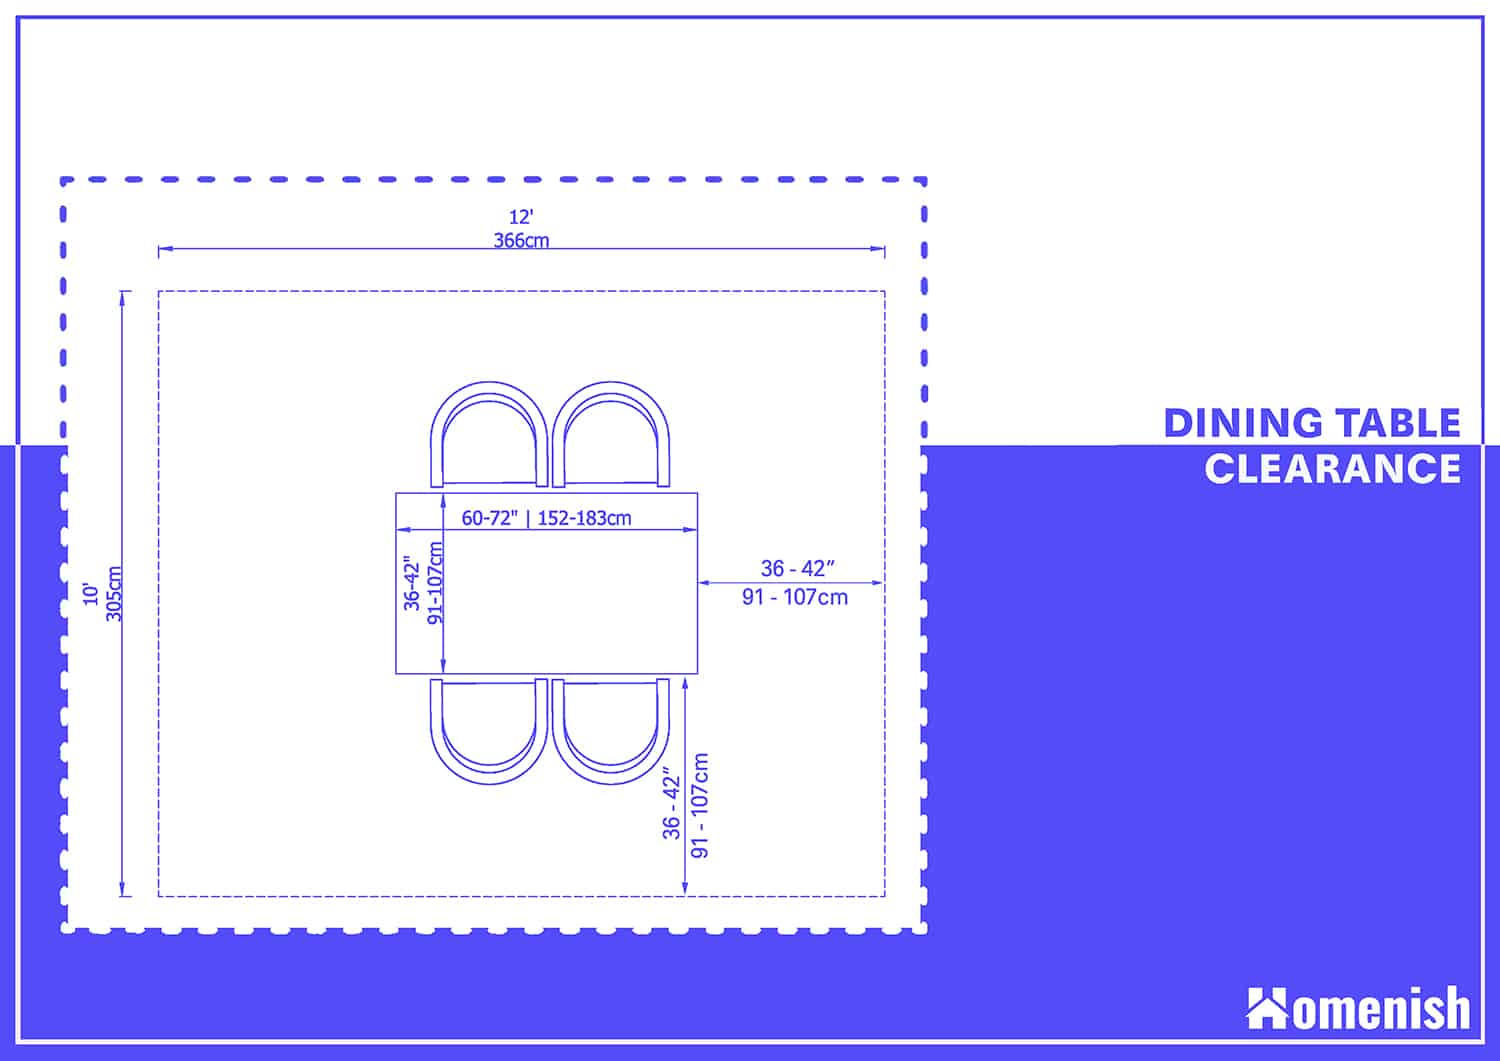 Standard Dining Table Dimensions, Standard 6 Chair Dining Table Dimensions